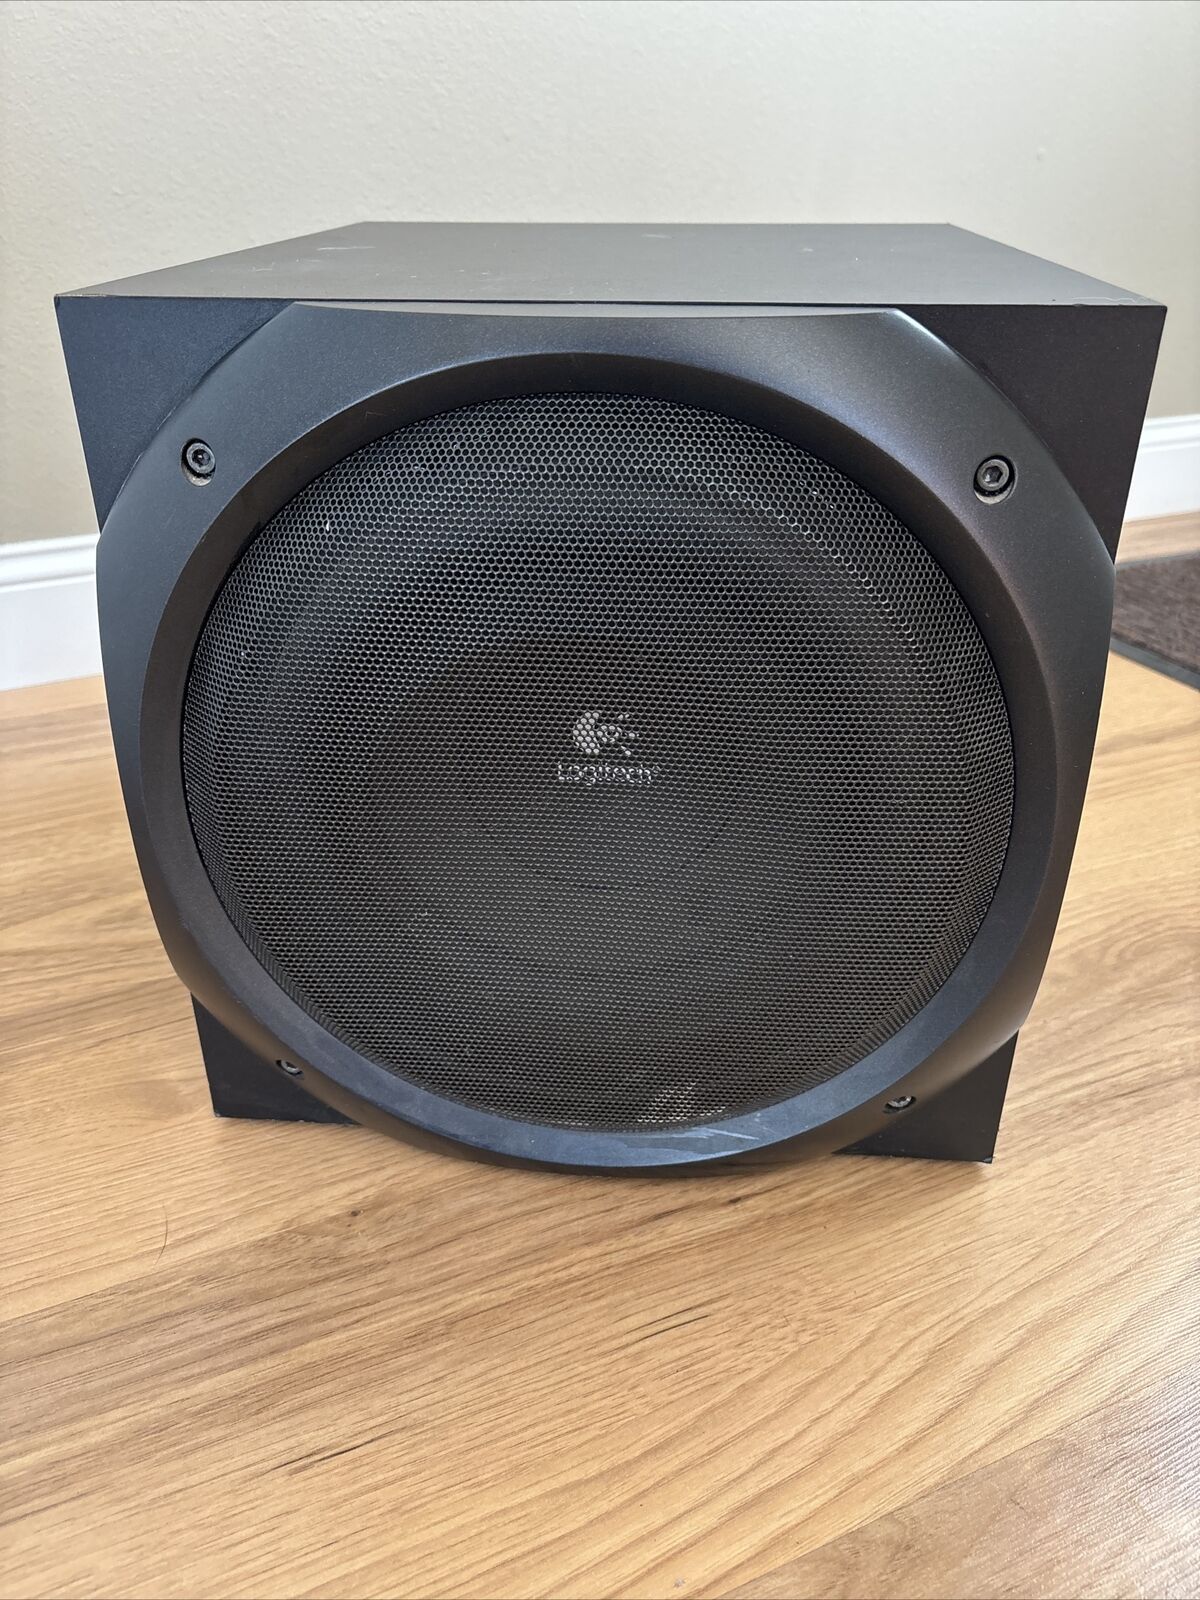 Logitech Z-5500 Powered Digital Subwoofer Only TESTED AND WORKING